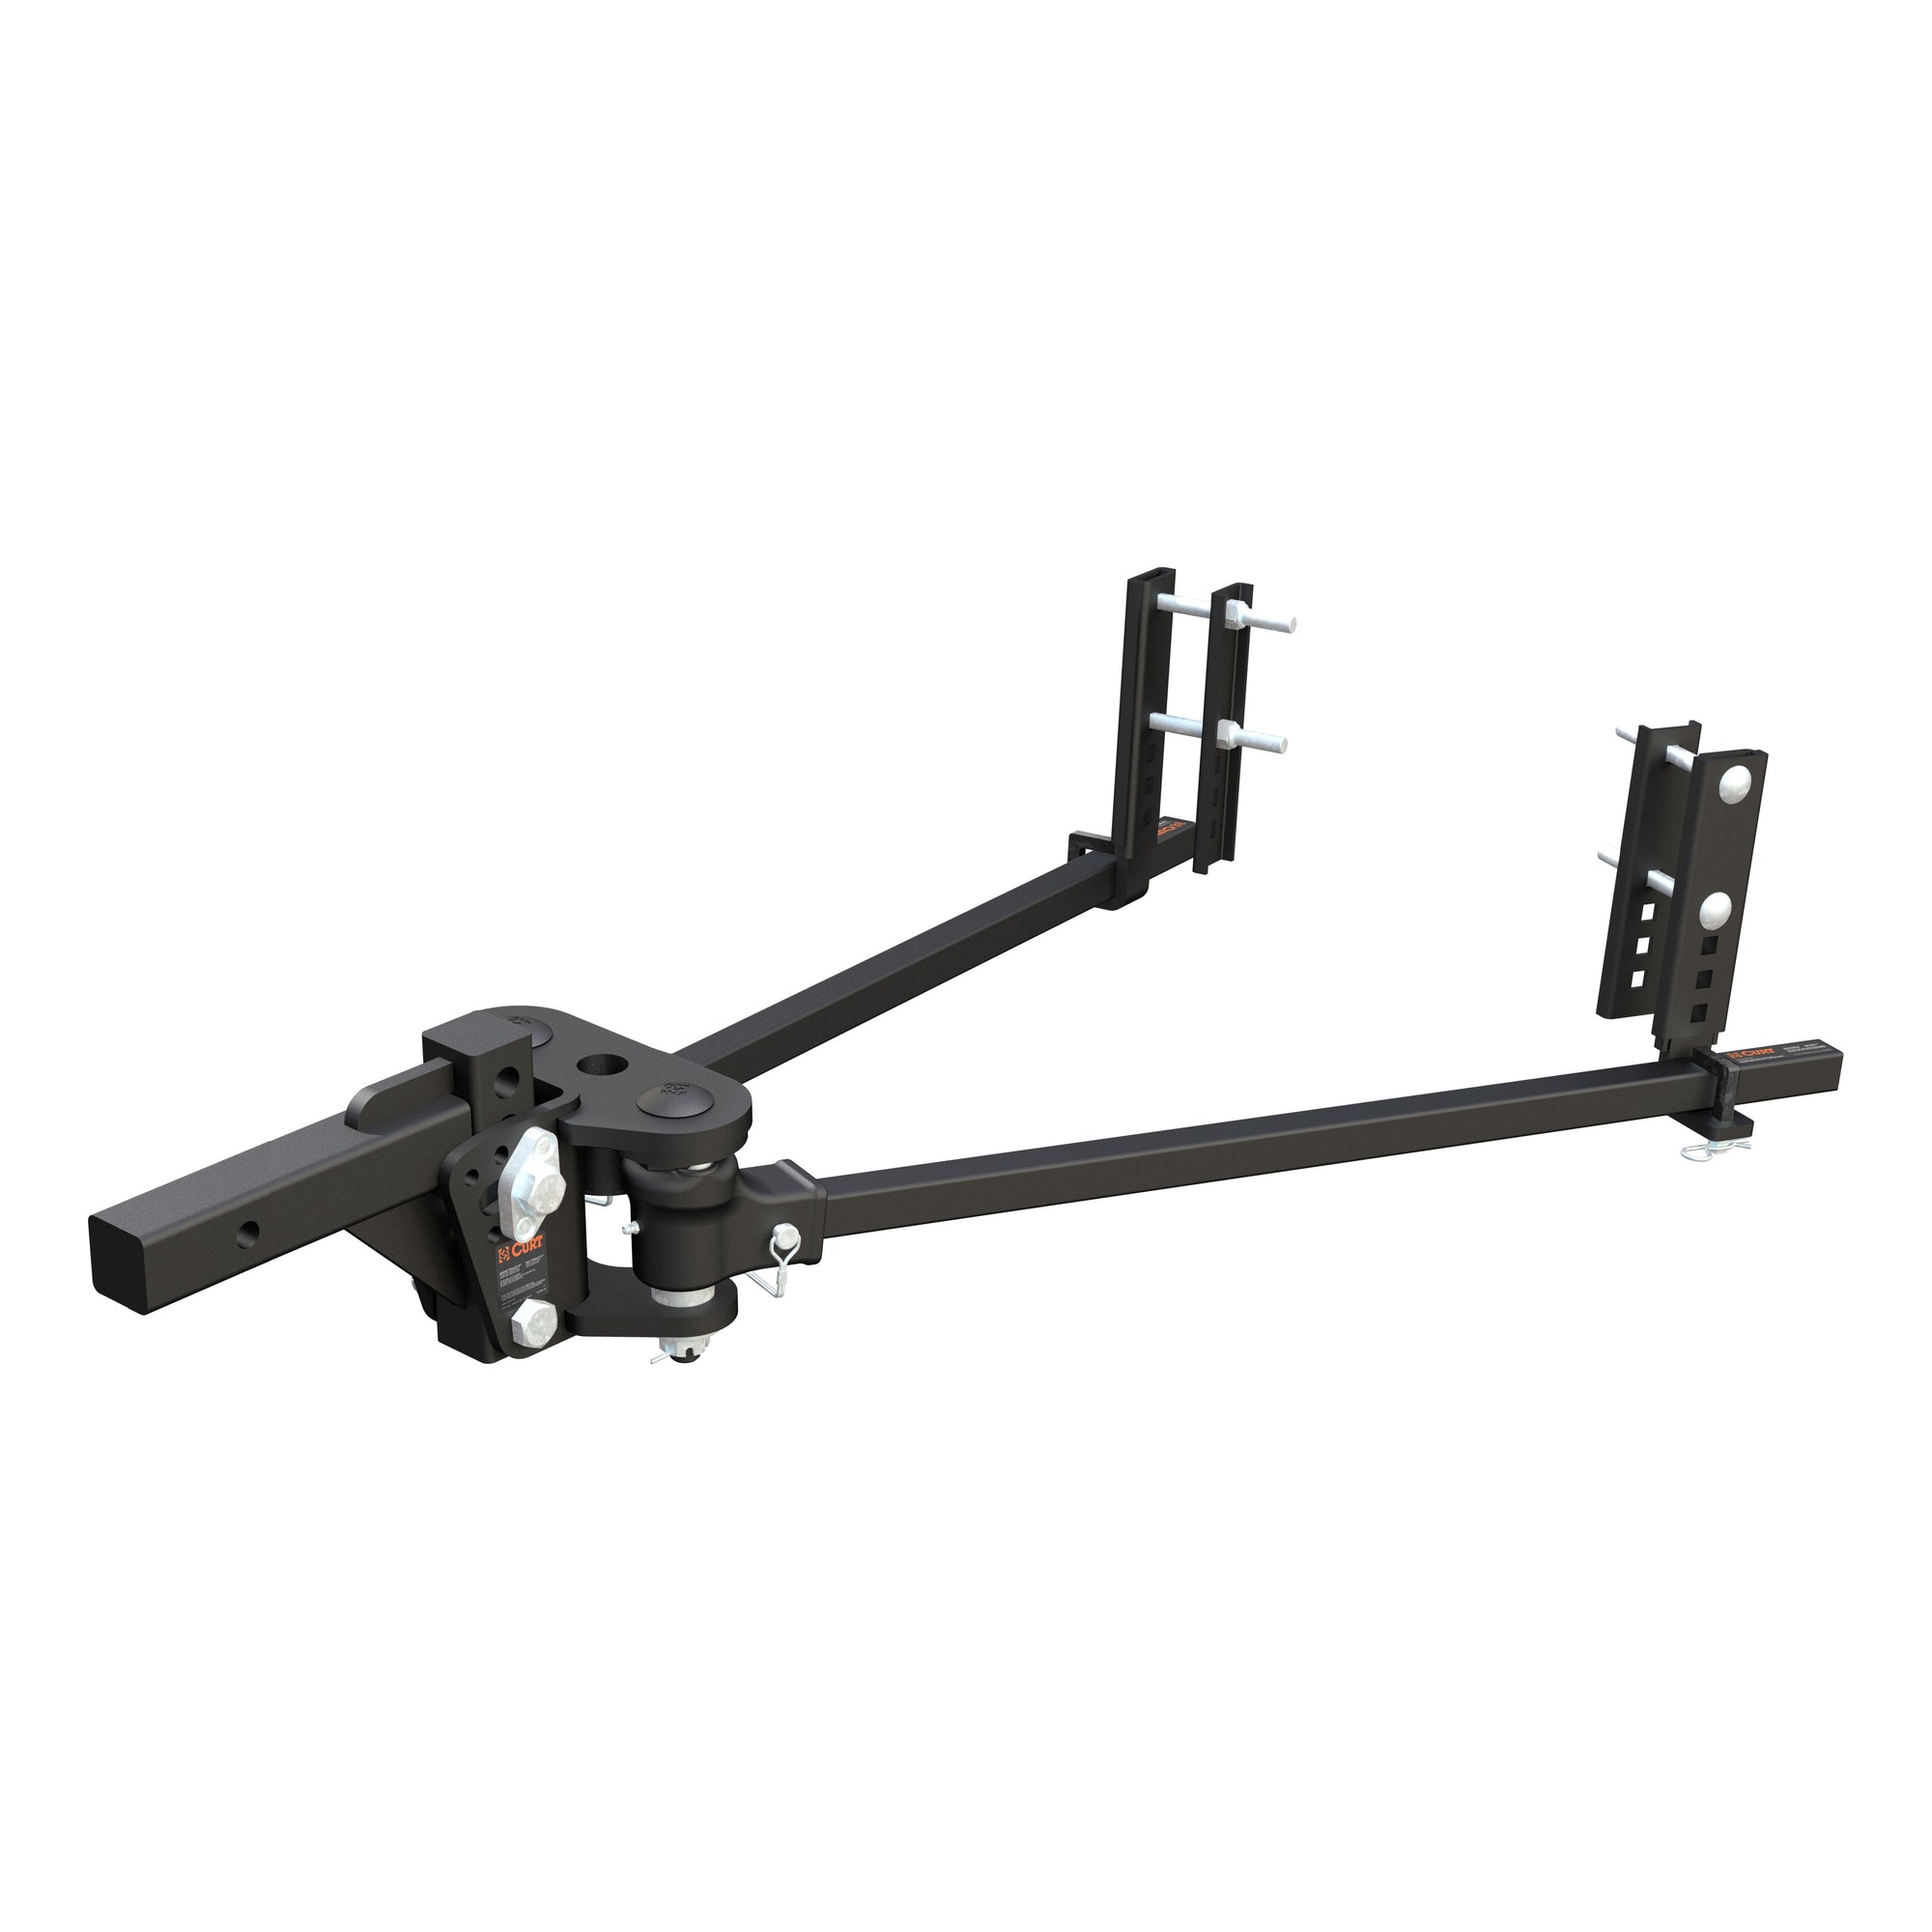 CURT 17499 TruTrack Light-Duty Weight Distribution Hitch with Sway Control, Up to 8K, 2" Shank